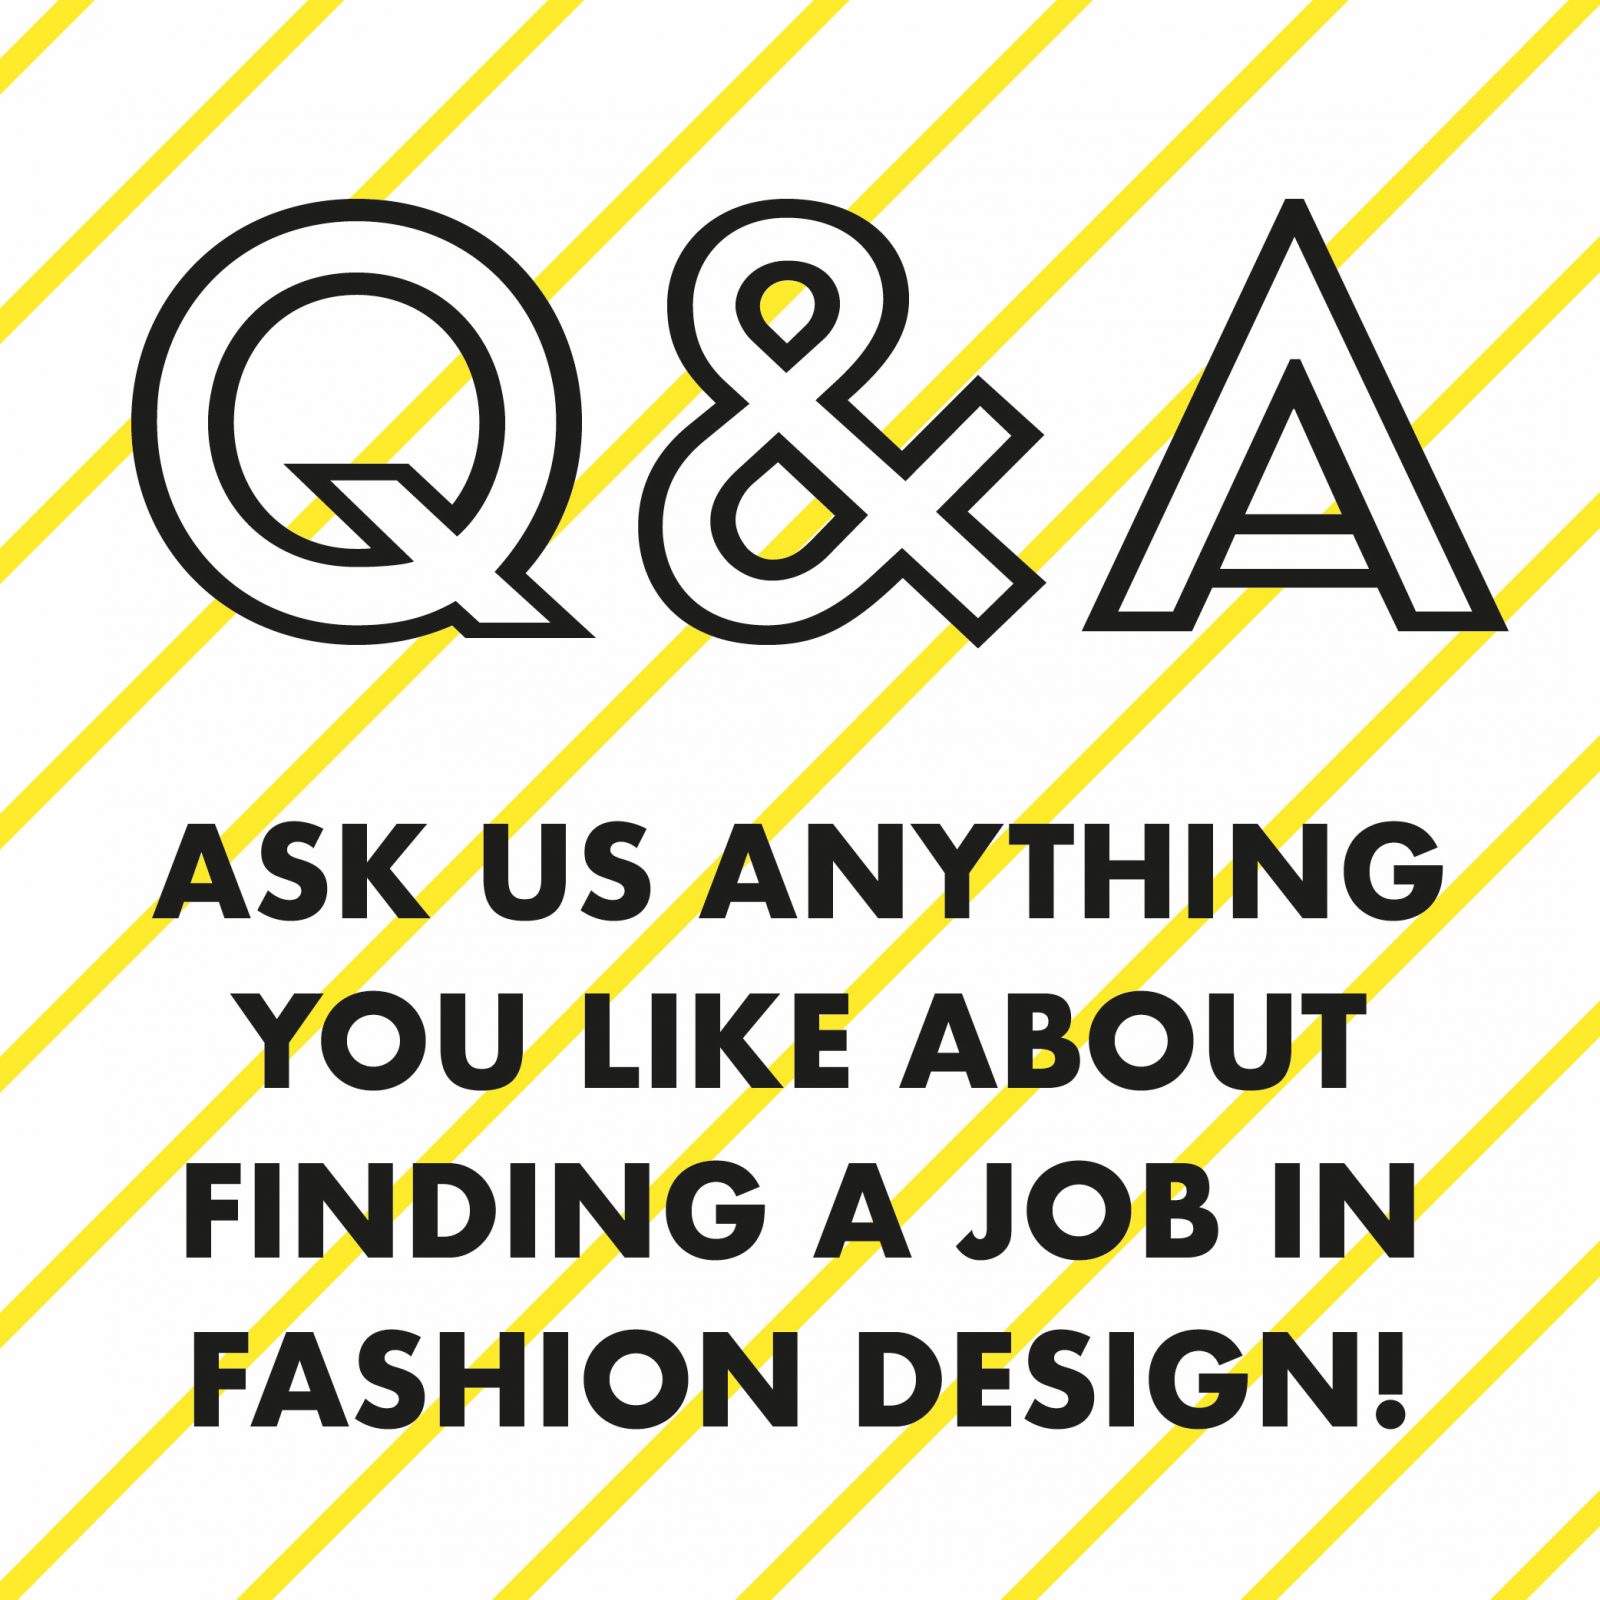 Q&A Questions and Answers job fashion!